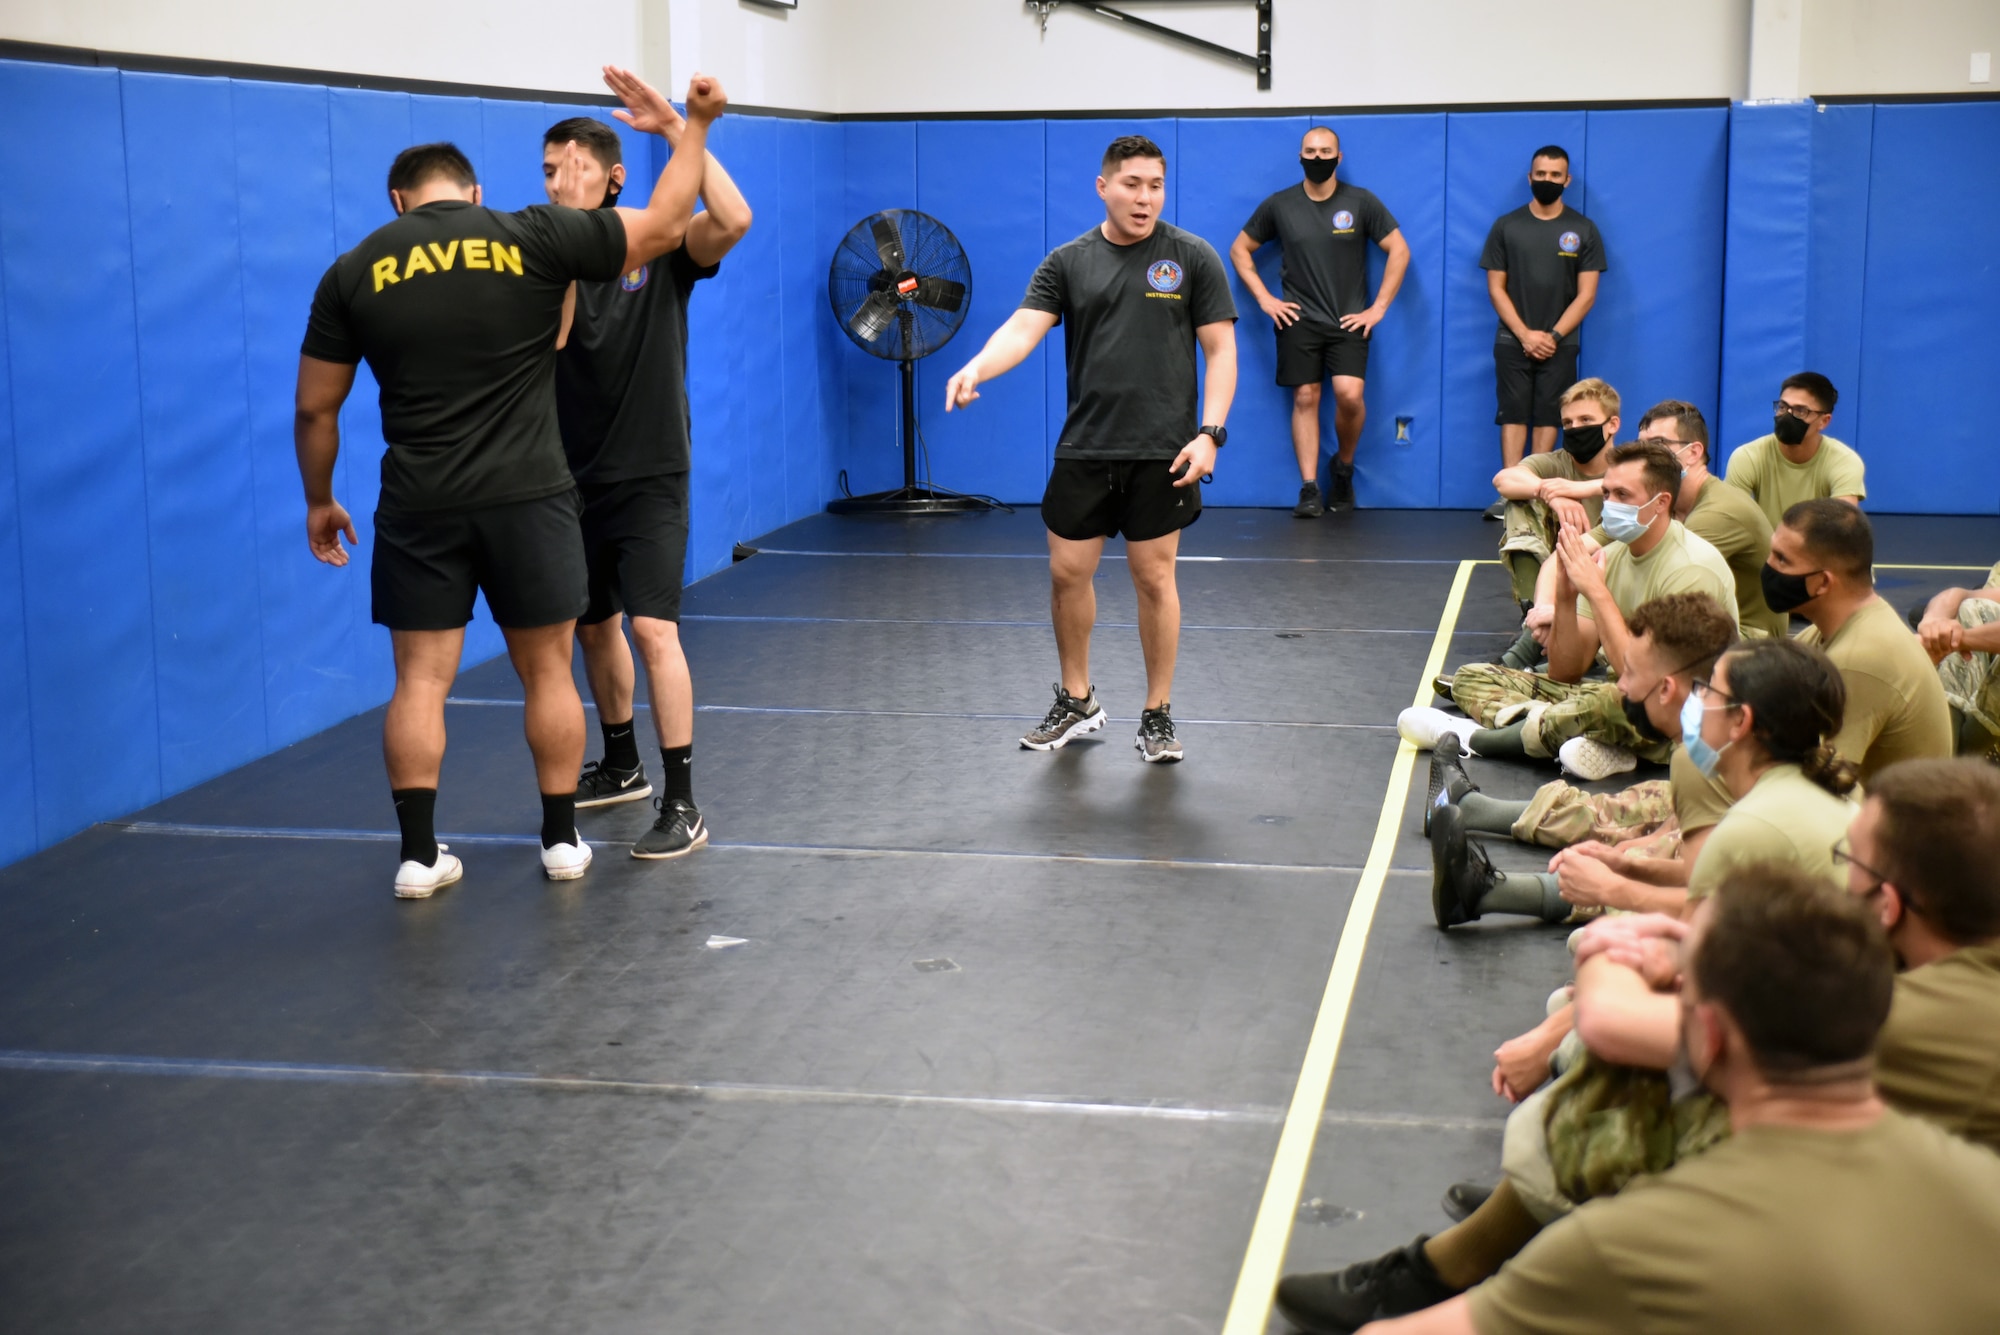 Phoenix Raven Qualification Instructors with the 421st Combat Training Squadron, demonstrate weapon defensive principles to the Phoenix Raven Qualification Course students in the U.S. Air Force Expeditionary Center’s Redman Room, Aug. 14, 2020, at Joint Base McGuire-Dix-Lakehurst, New Jersey. The course, which ran from July 27 to Aug, 19, qualifies selected security forces personnel to perform as members of a force protection team assigned to deploy with Department of Defense aircraft to austere environments. Students are trained to perform as teams to detect, deter, and counter threats to personnel/aircraft at deployed locations by performing close-in aircraft security and advising aircrew on force protection measures. In addition, the course prepares students to conduct/report airfield assessments and perform flight deck denial duties on select missions. (U.S. Air Force photo by Maj. George Tobias)